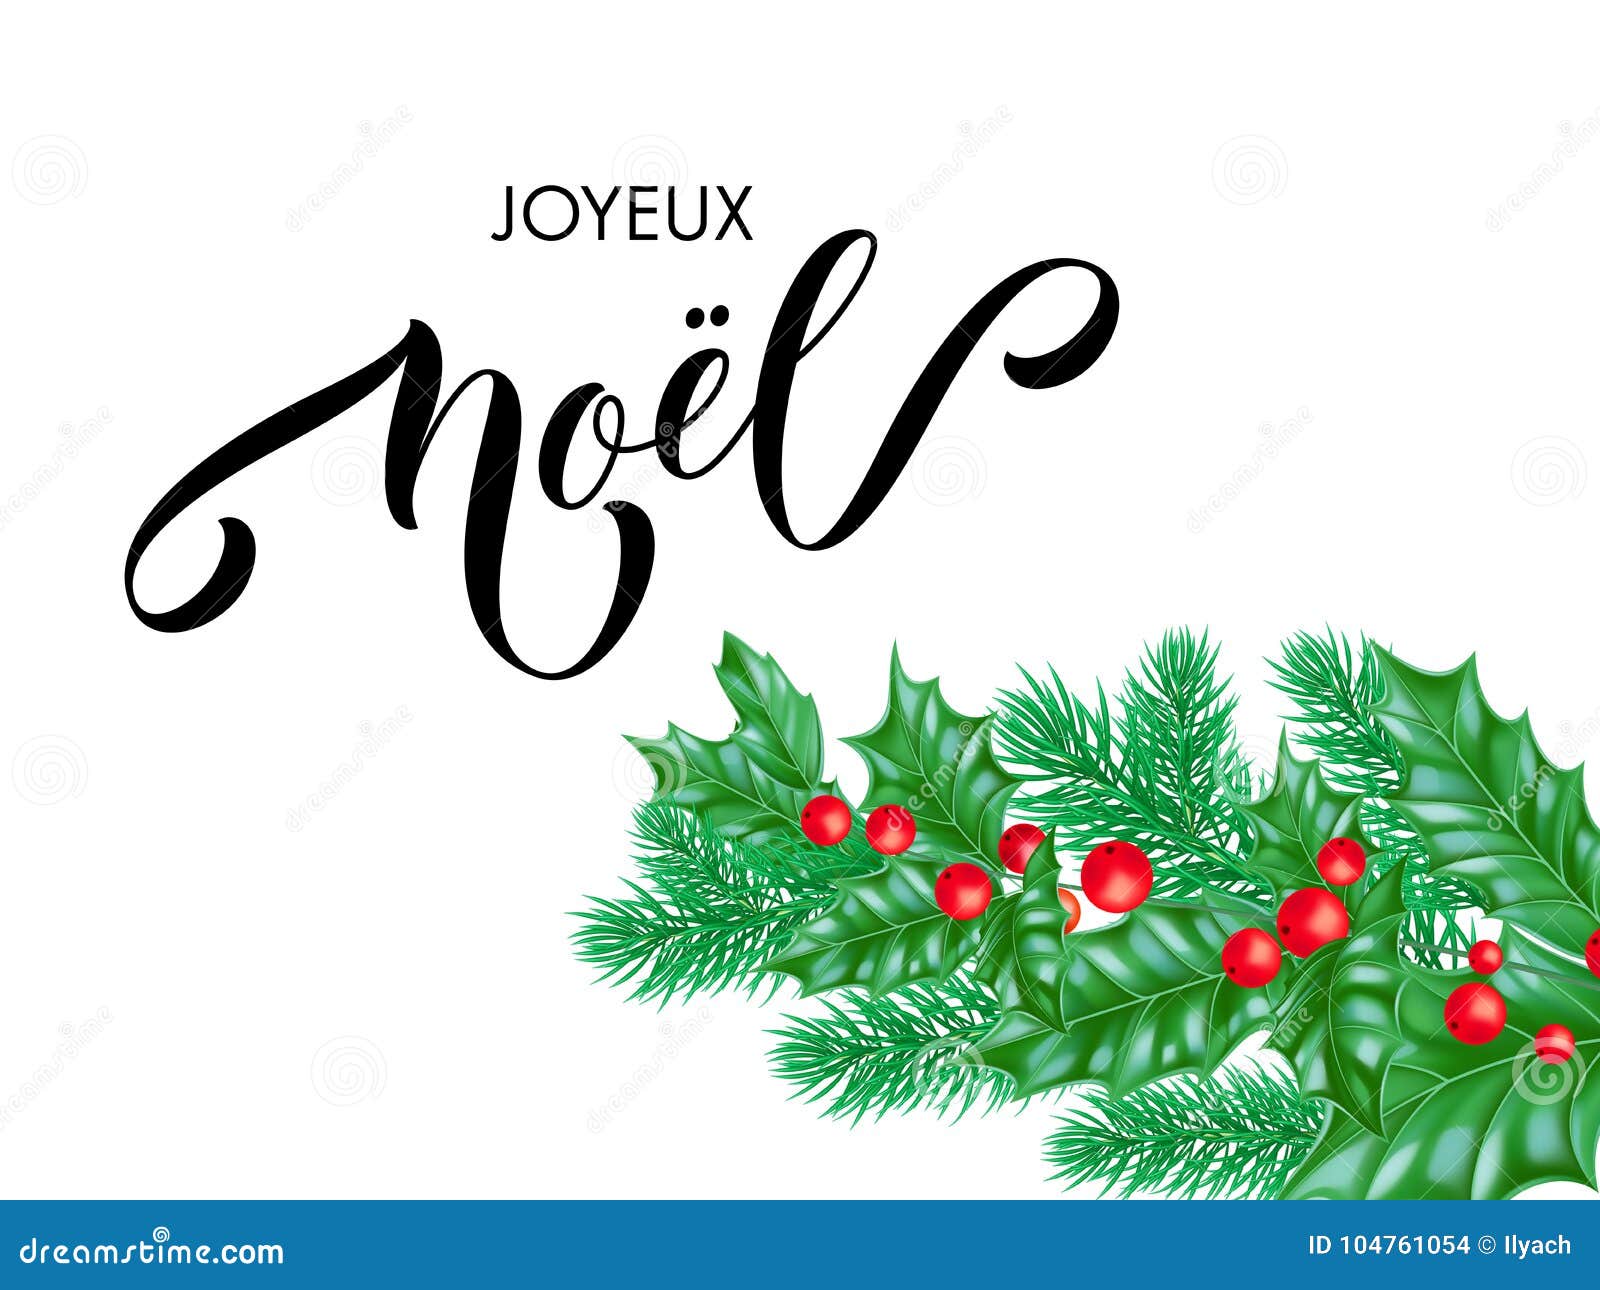 Greeting Card Background Template Download p